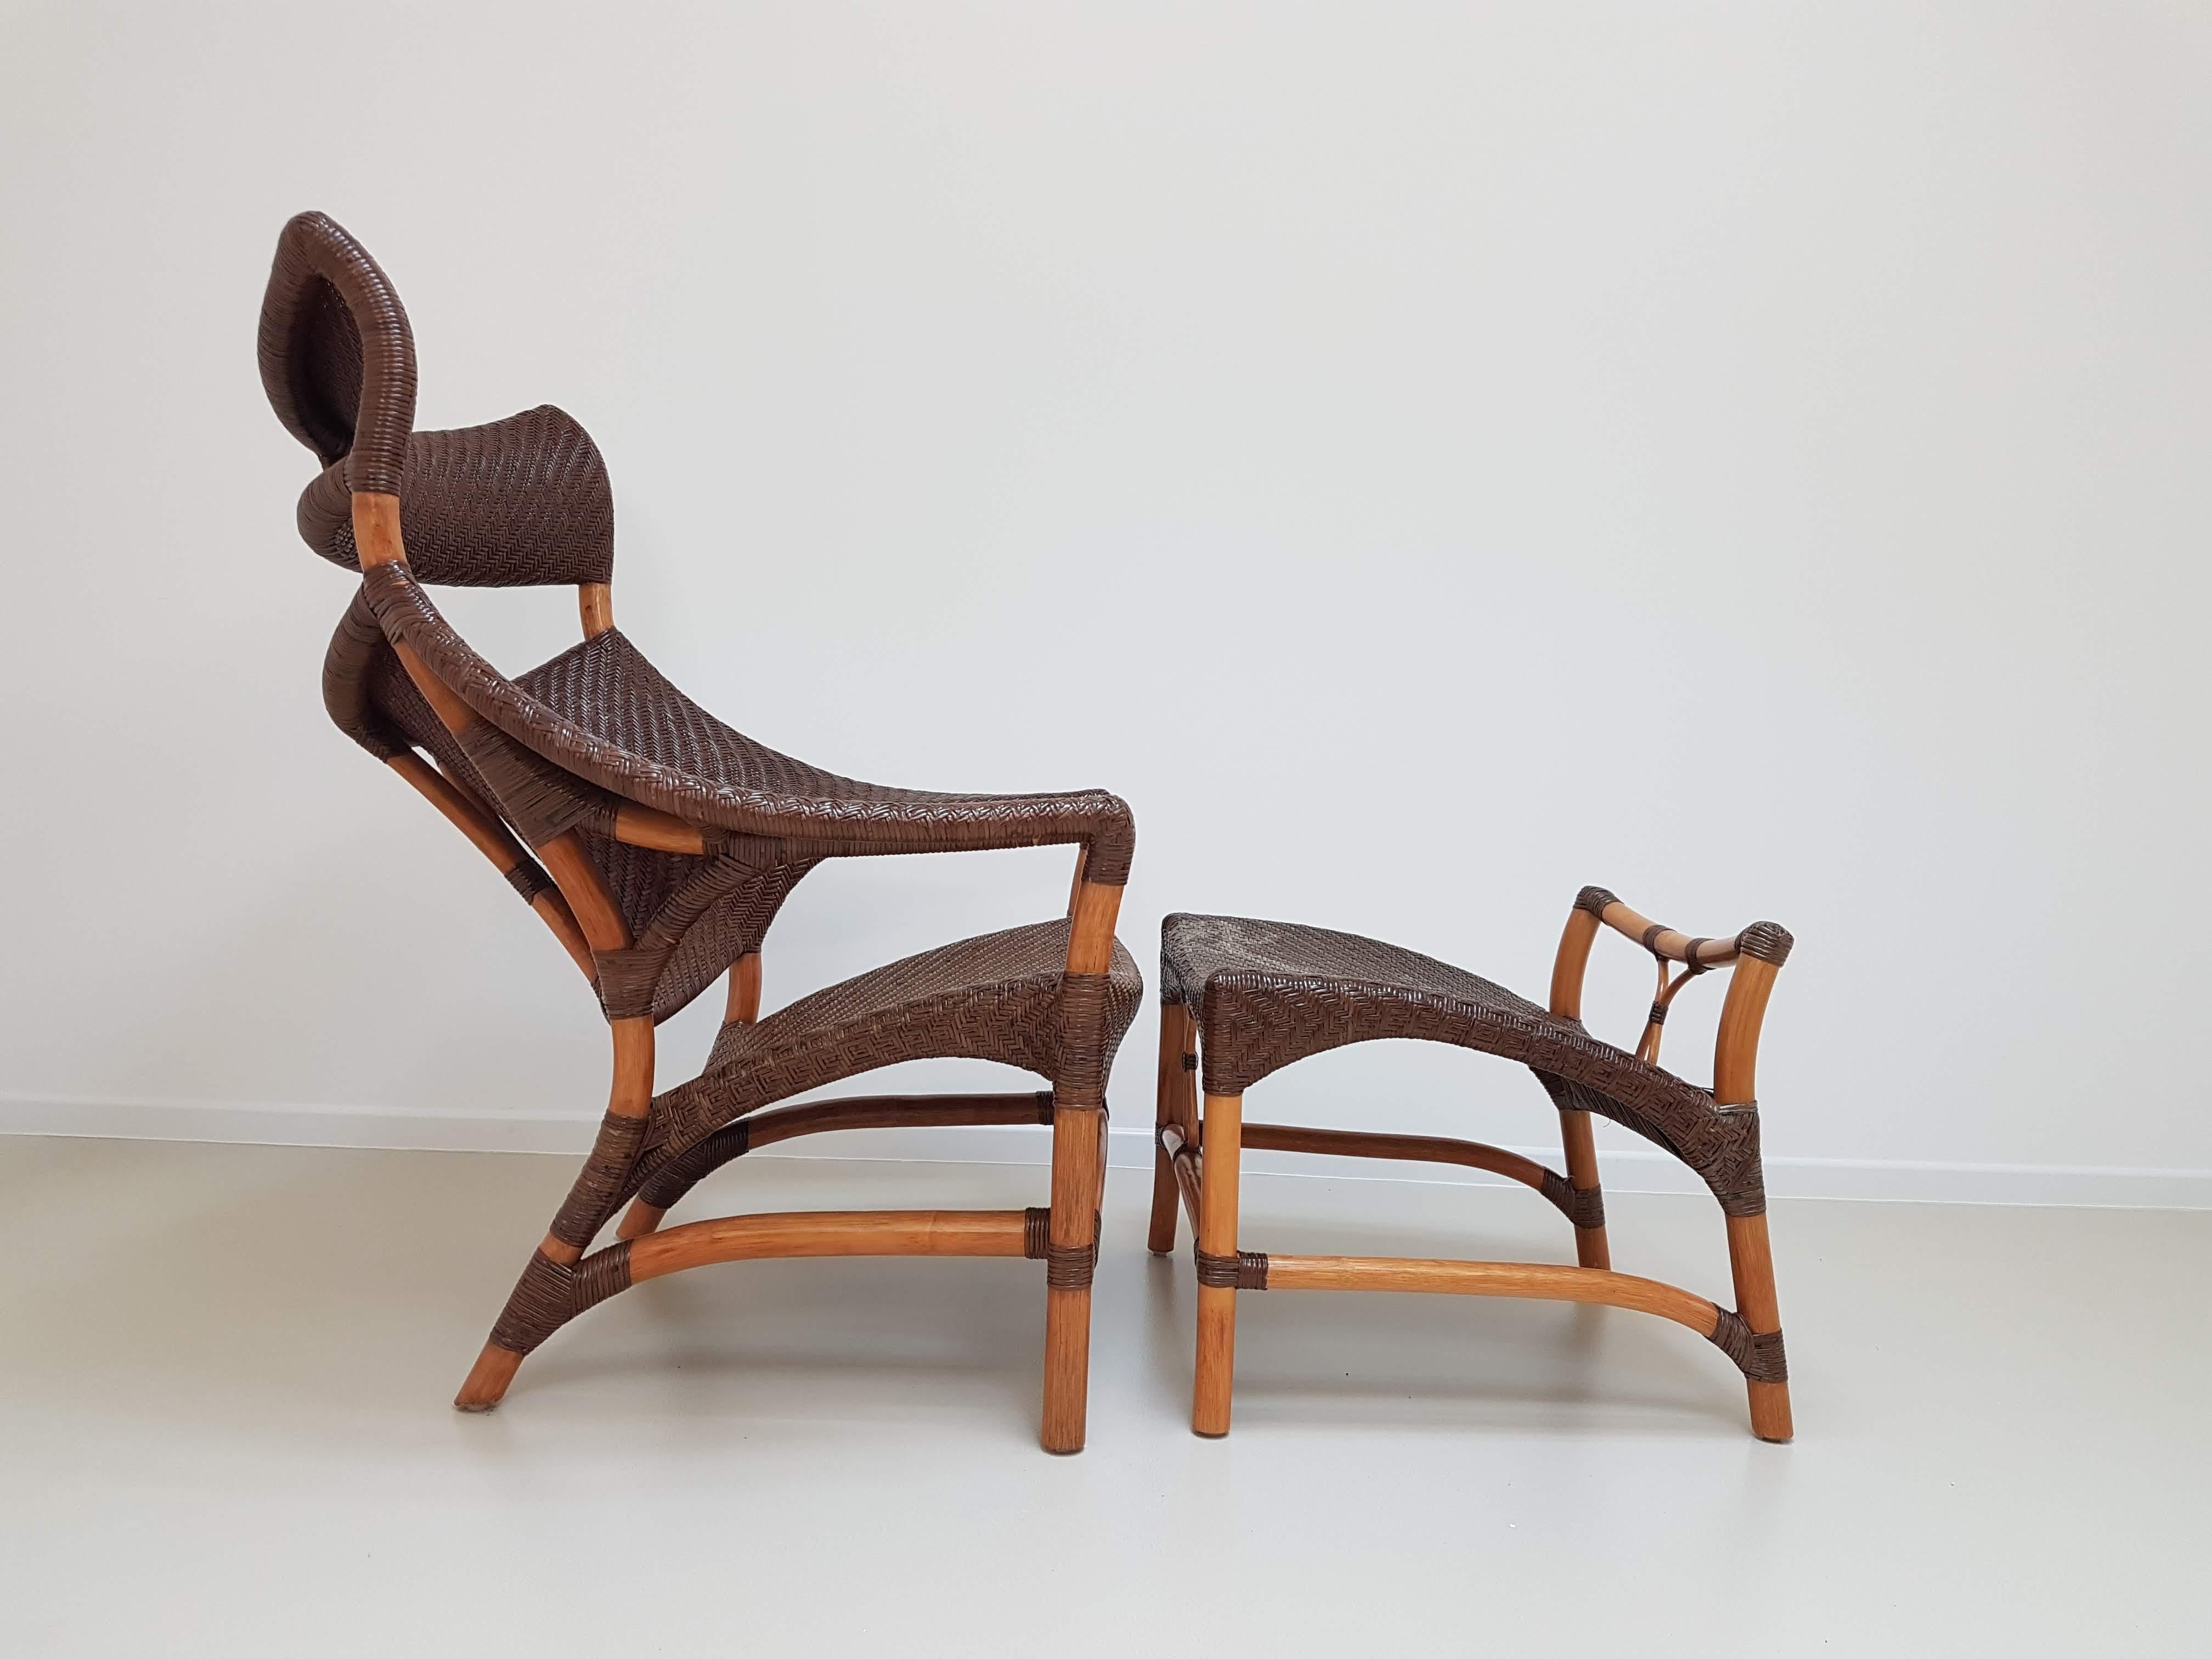 Exceptional rattan chair and footrest CL-261 by Yamakawa, Japan, circa 1980s.

Yuzru Yamakawa joined the family rattan furniture business at its inception in the 1950s. A gifted designer, he led the company's development, producing high quality